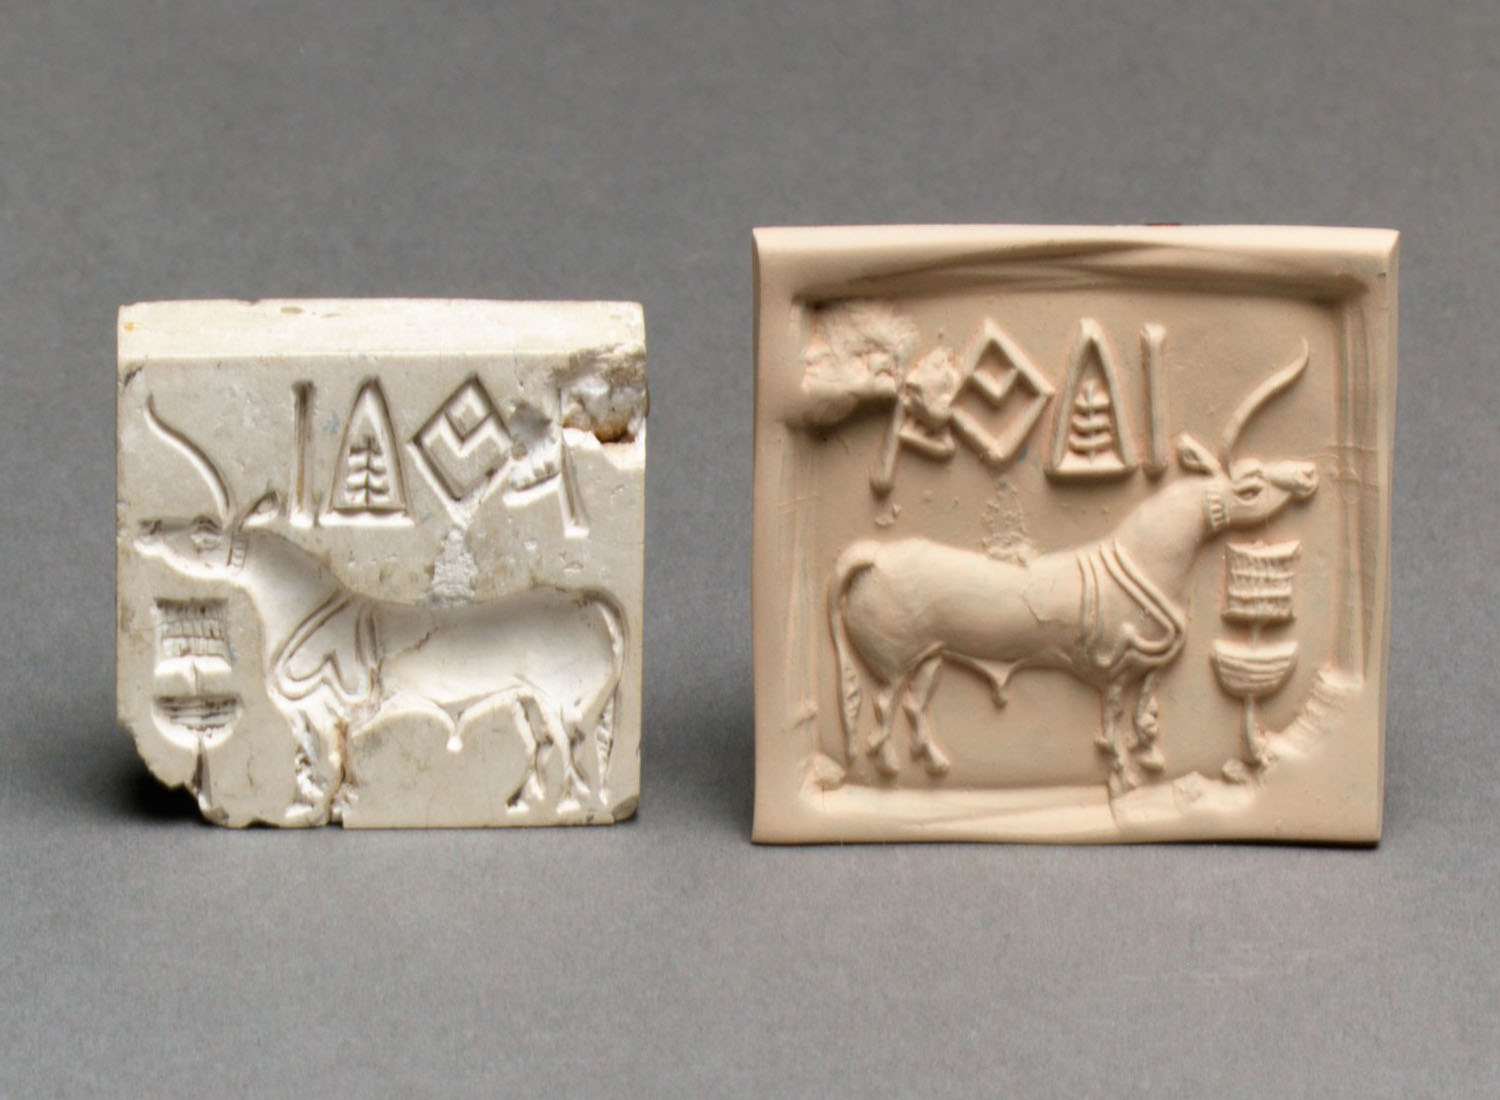 Two steatite seals depicting a unicorn-like animal and the Indus script on top.